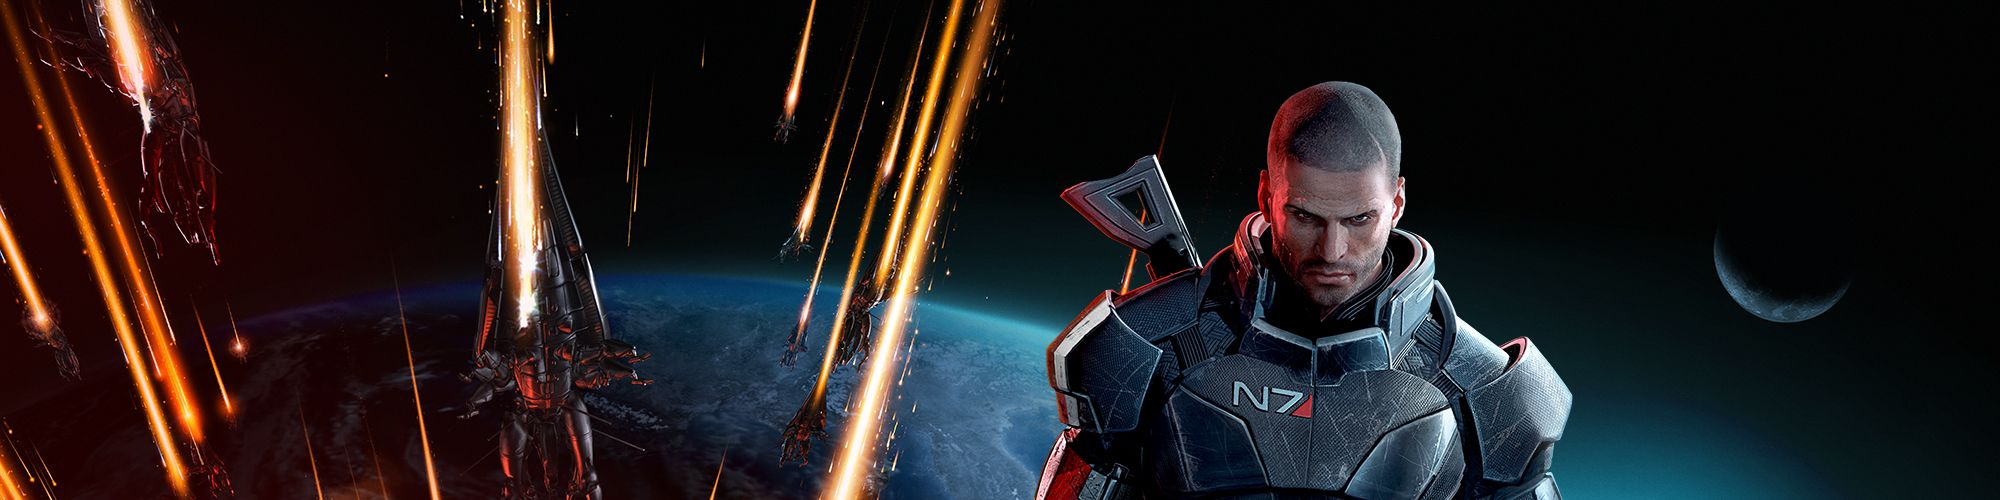 Mass Effect 3 (2012) technical specifications for computer